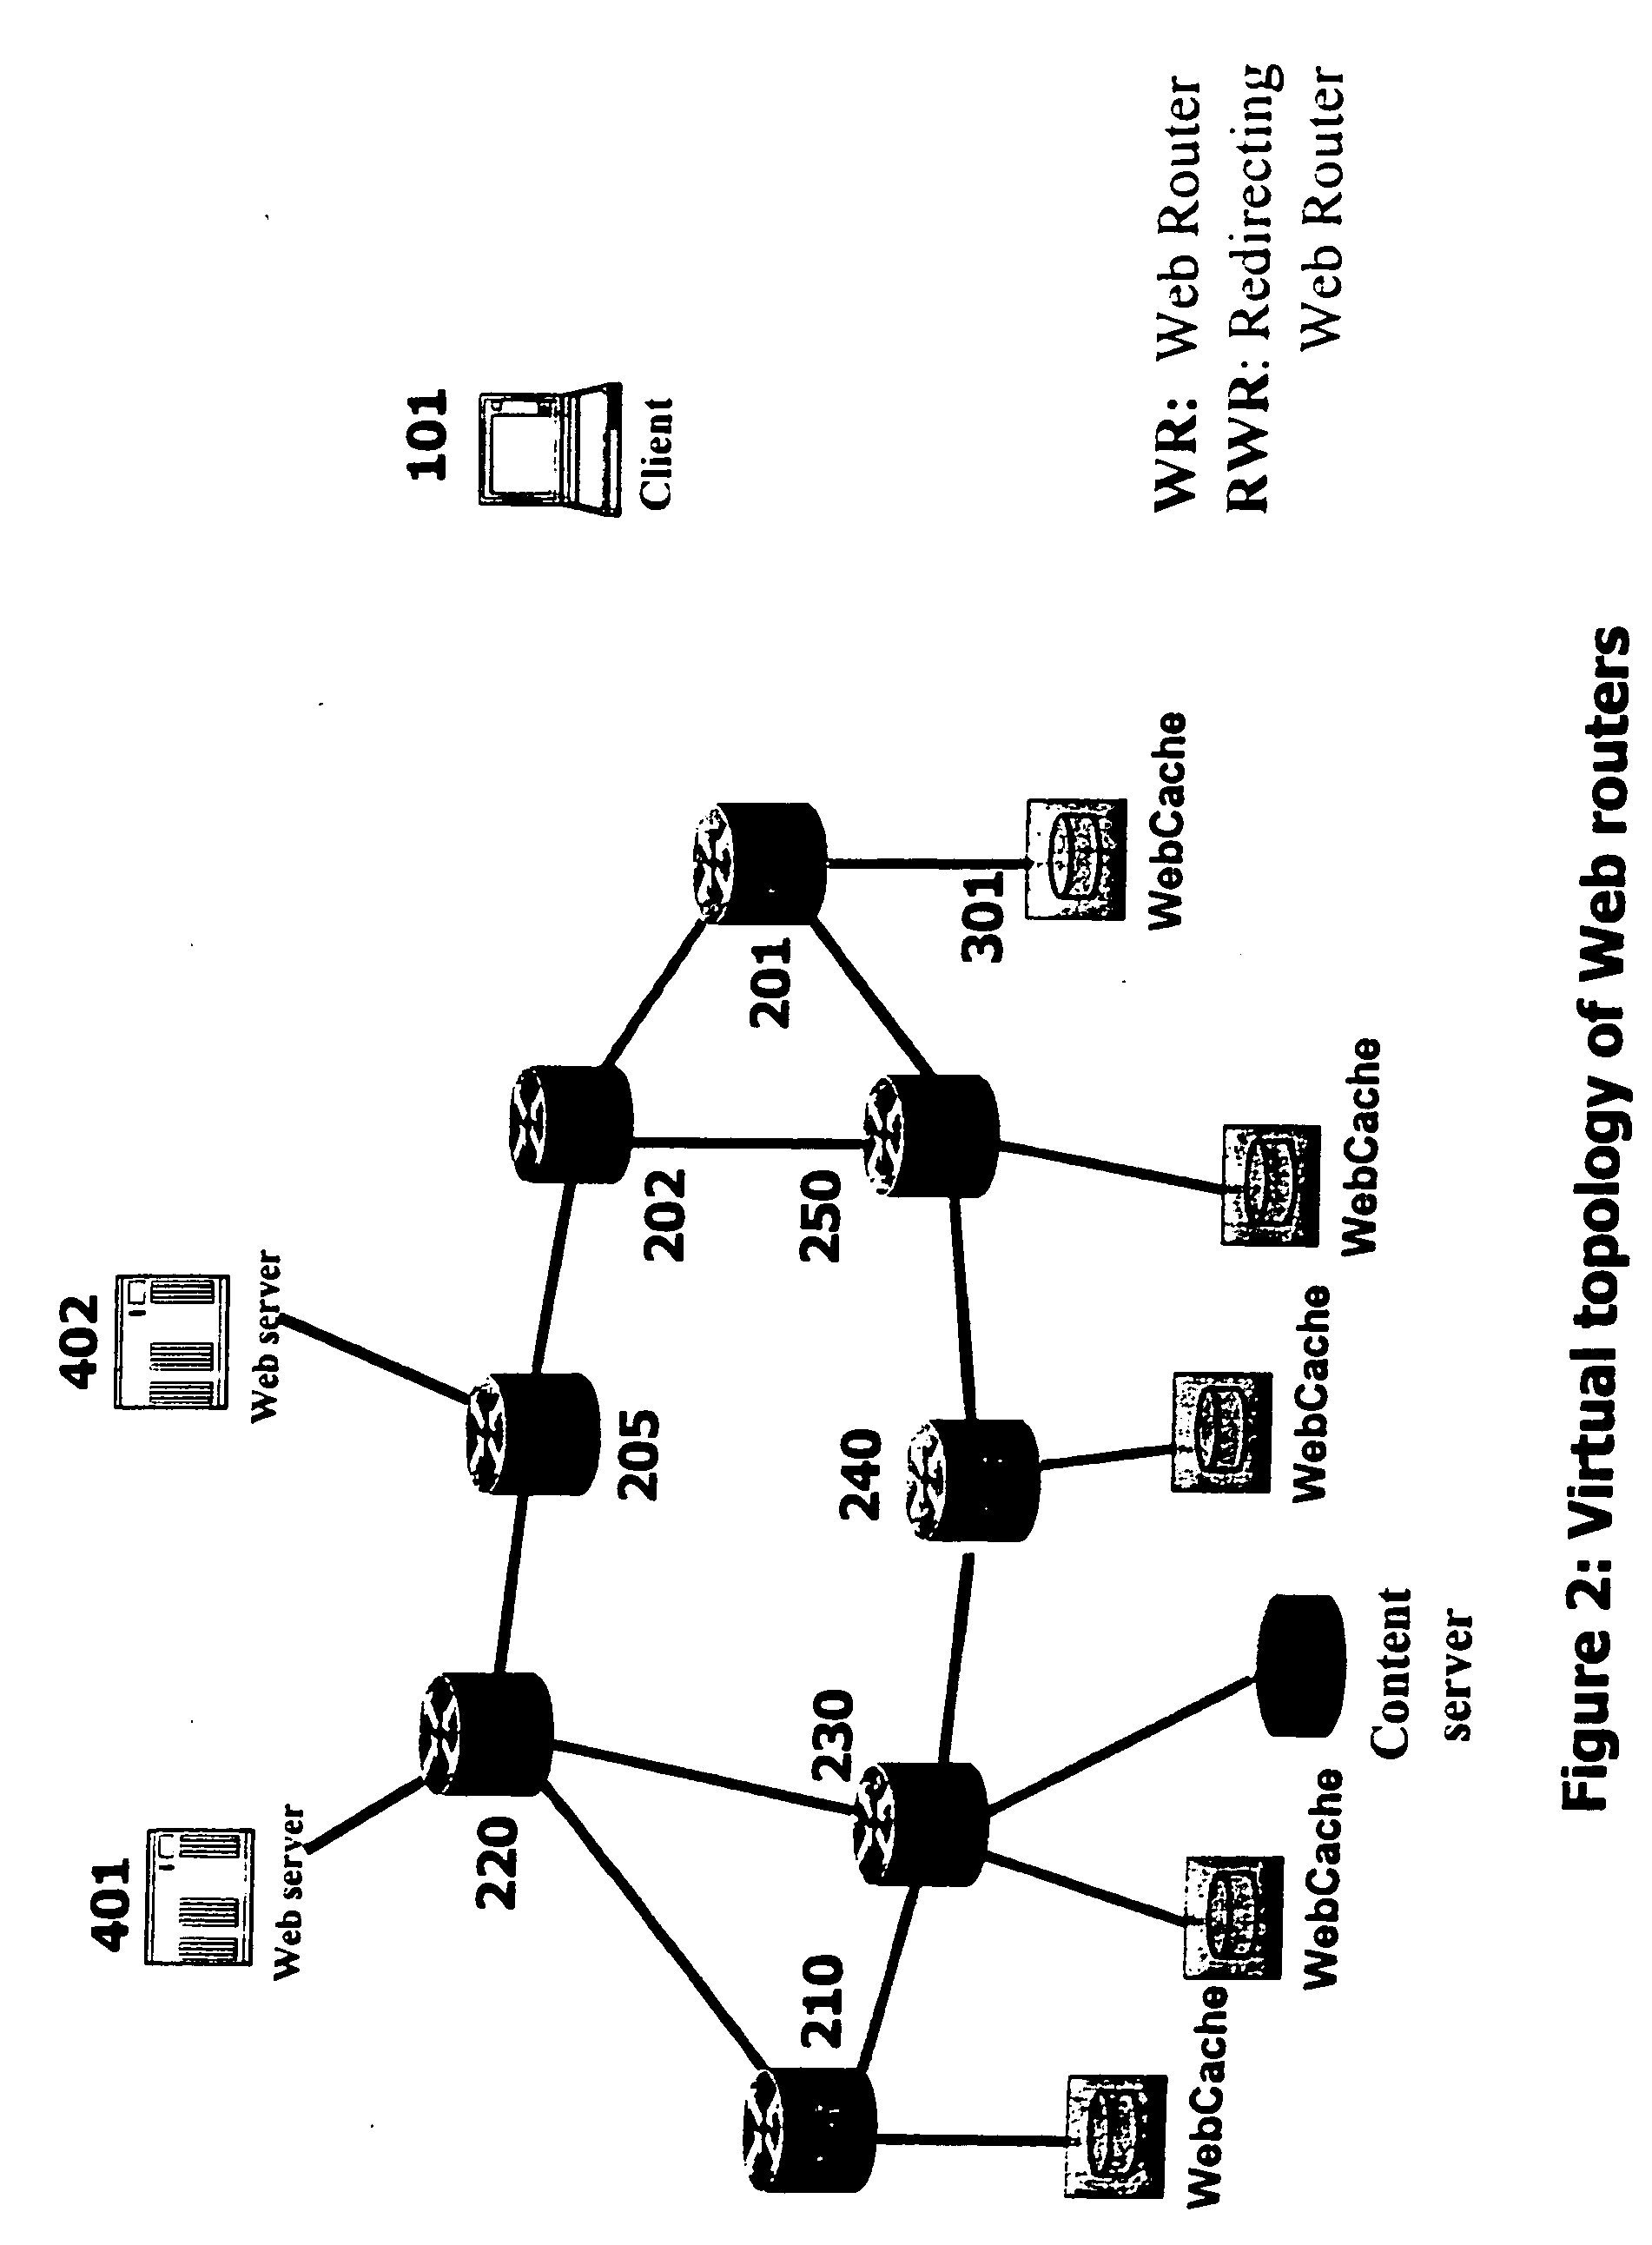 System and method for discovering information objects and information object repositories in computer networks